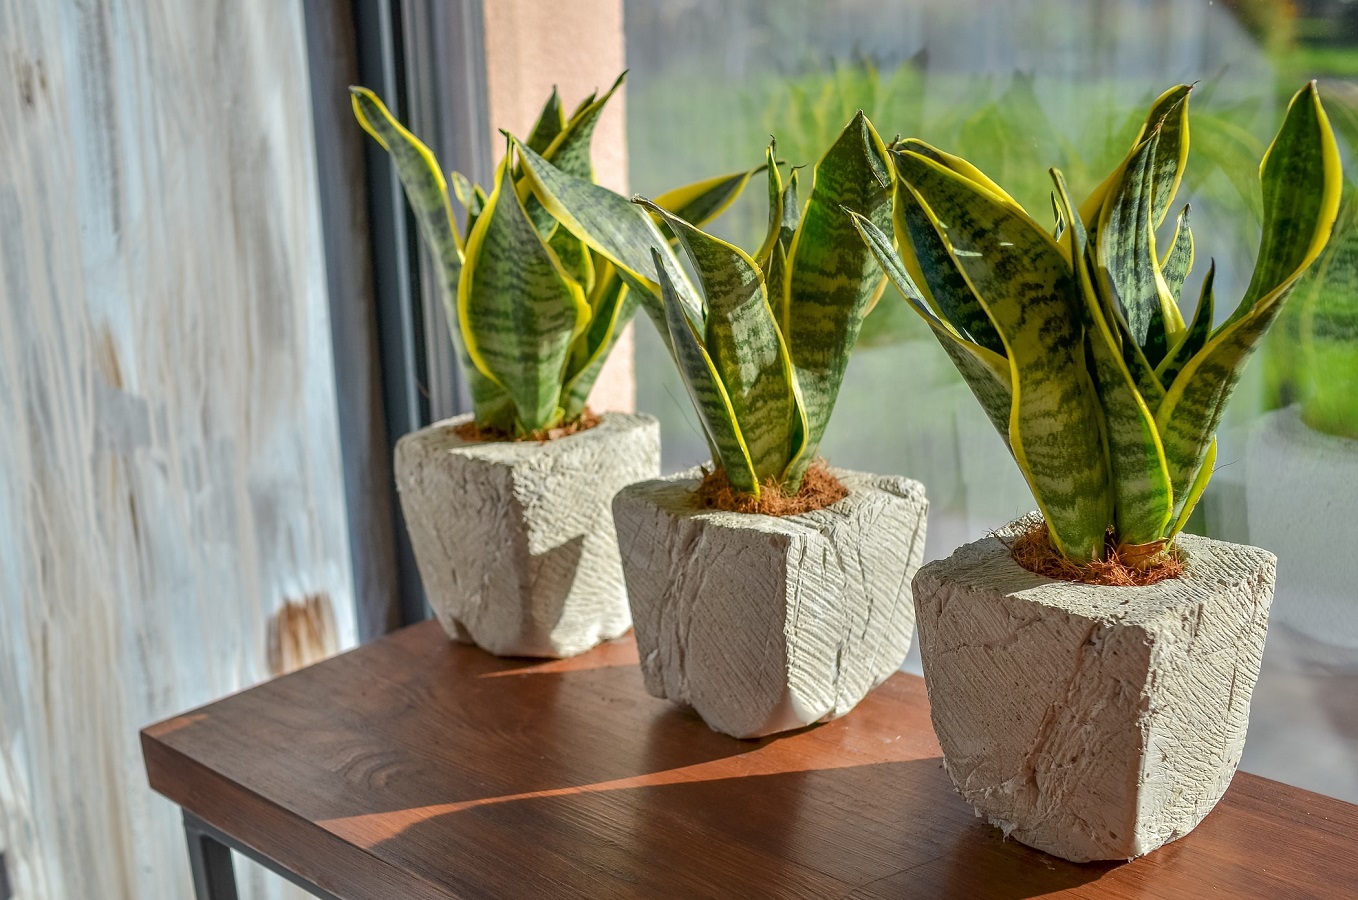 Snake Plant Care - Learn How to Care for Sansevieria Plant